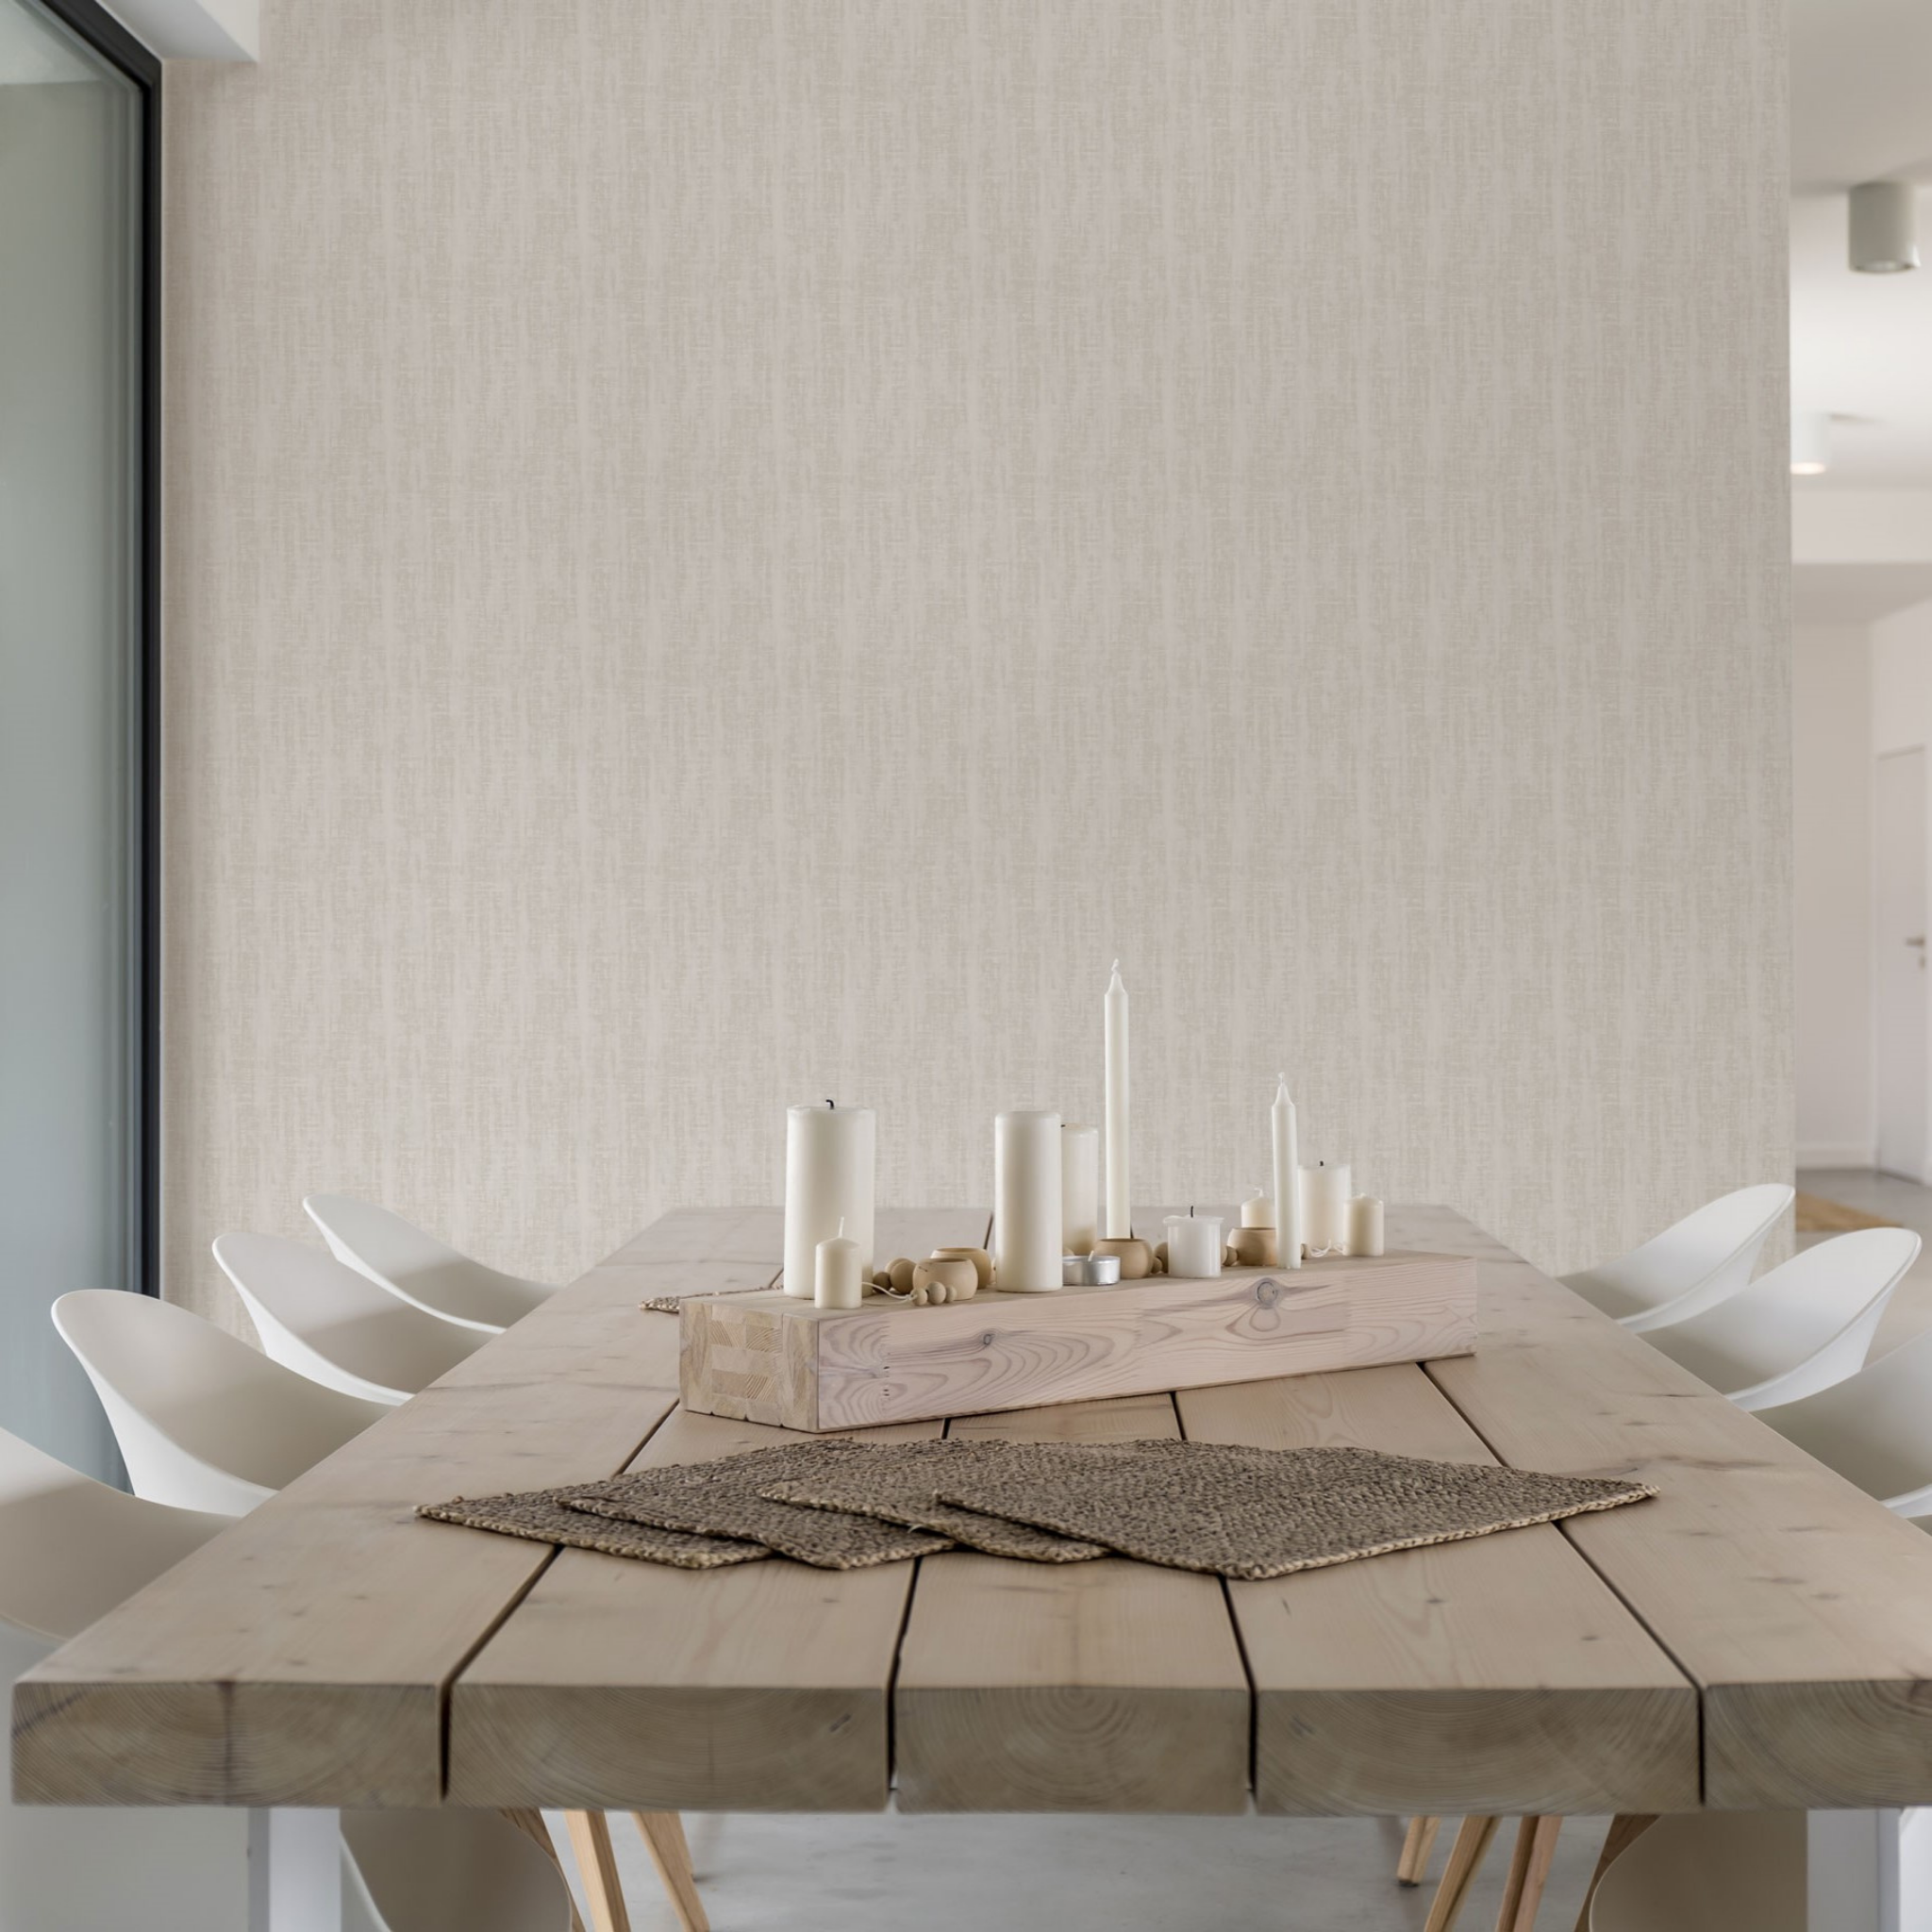 "Wall Blush Utopia Wallpaper showcased in a modern dining room setting, emphasizing texture and elegance."